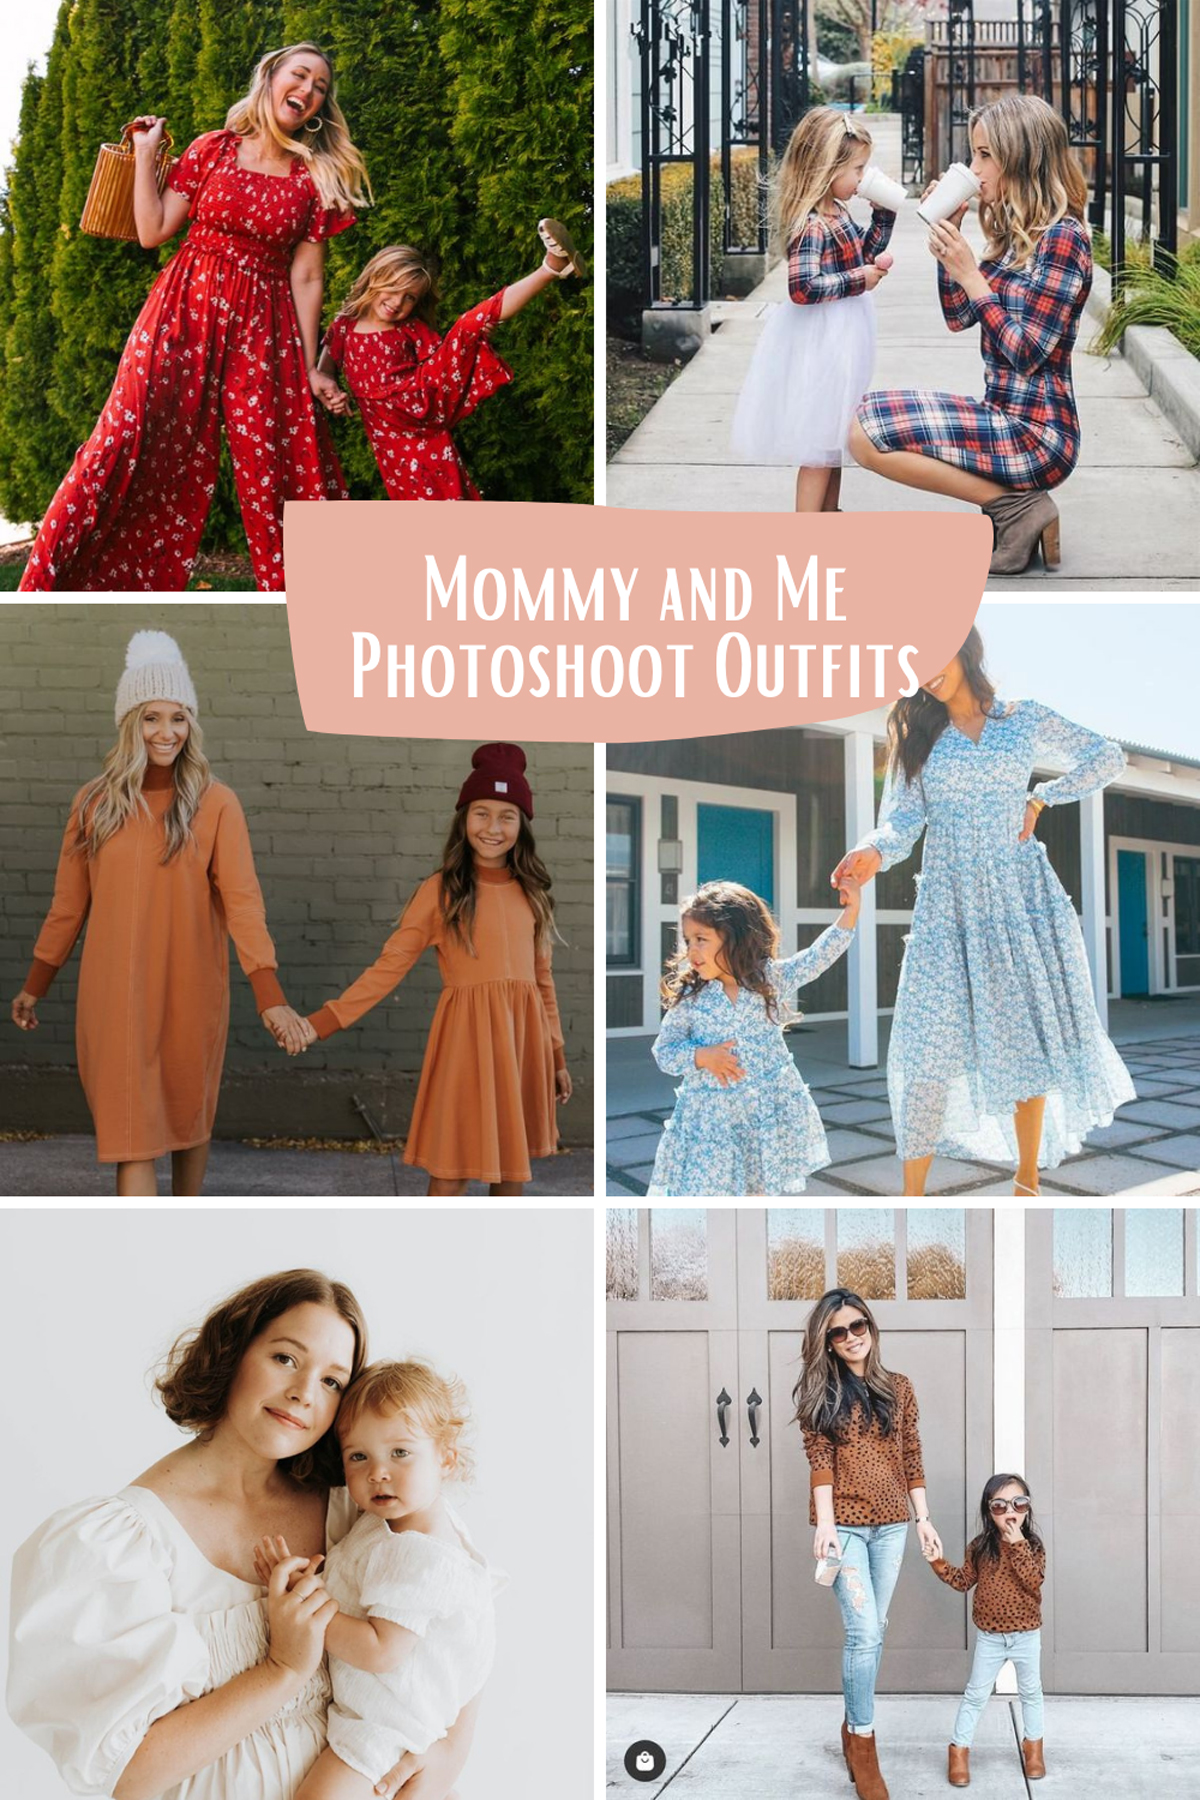 Mommy and Me Photoshoot Outfits